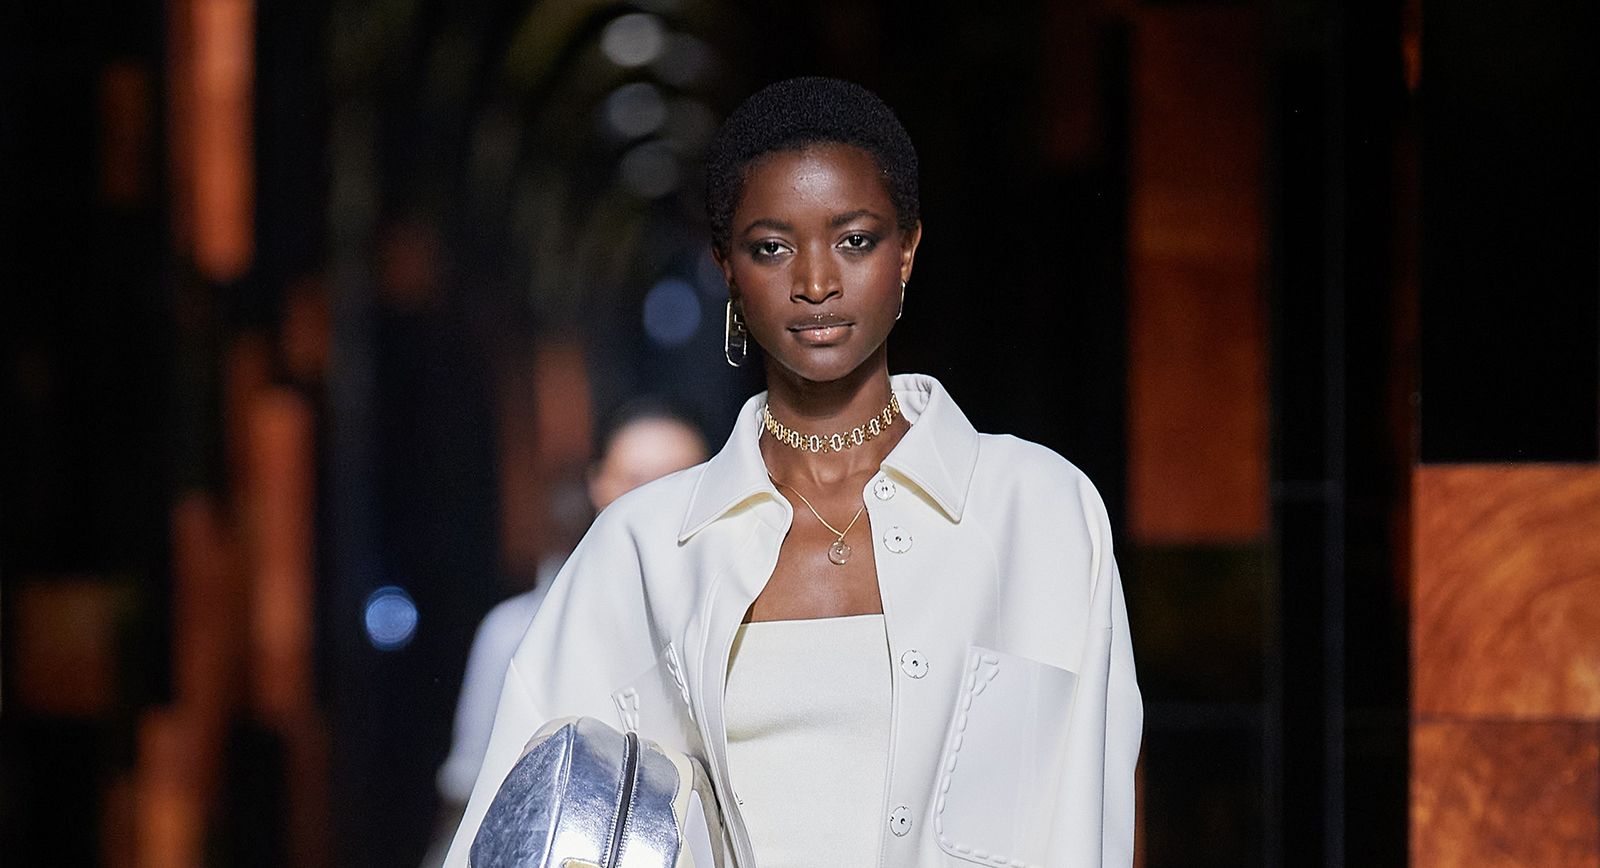 Jewelry-as-Clothing is Trending in Fall 2022 Haute Couture